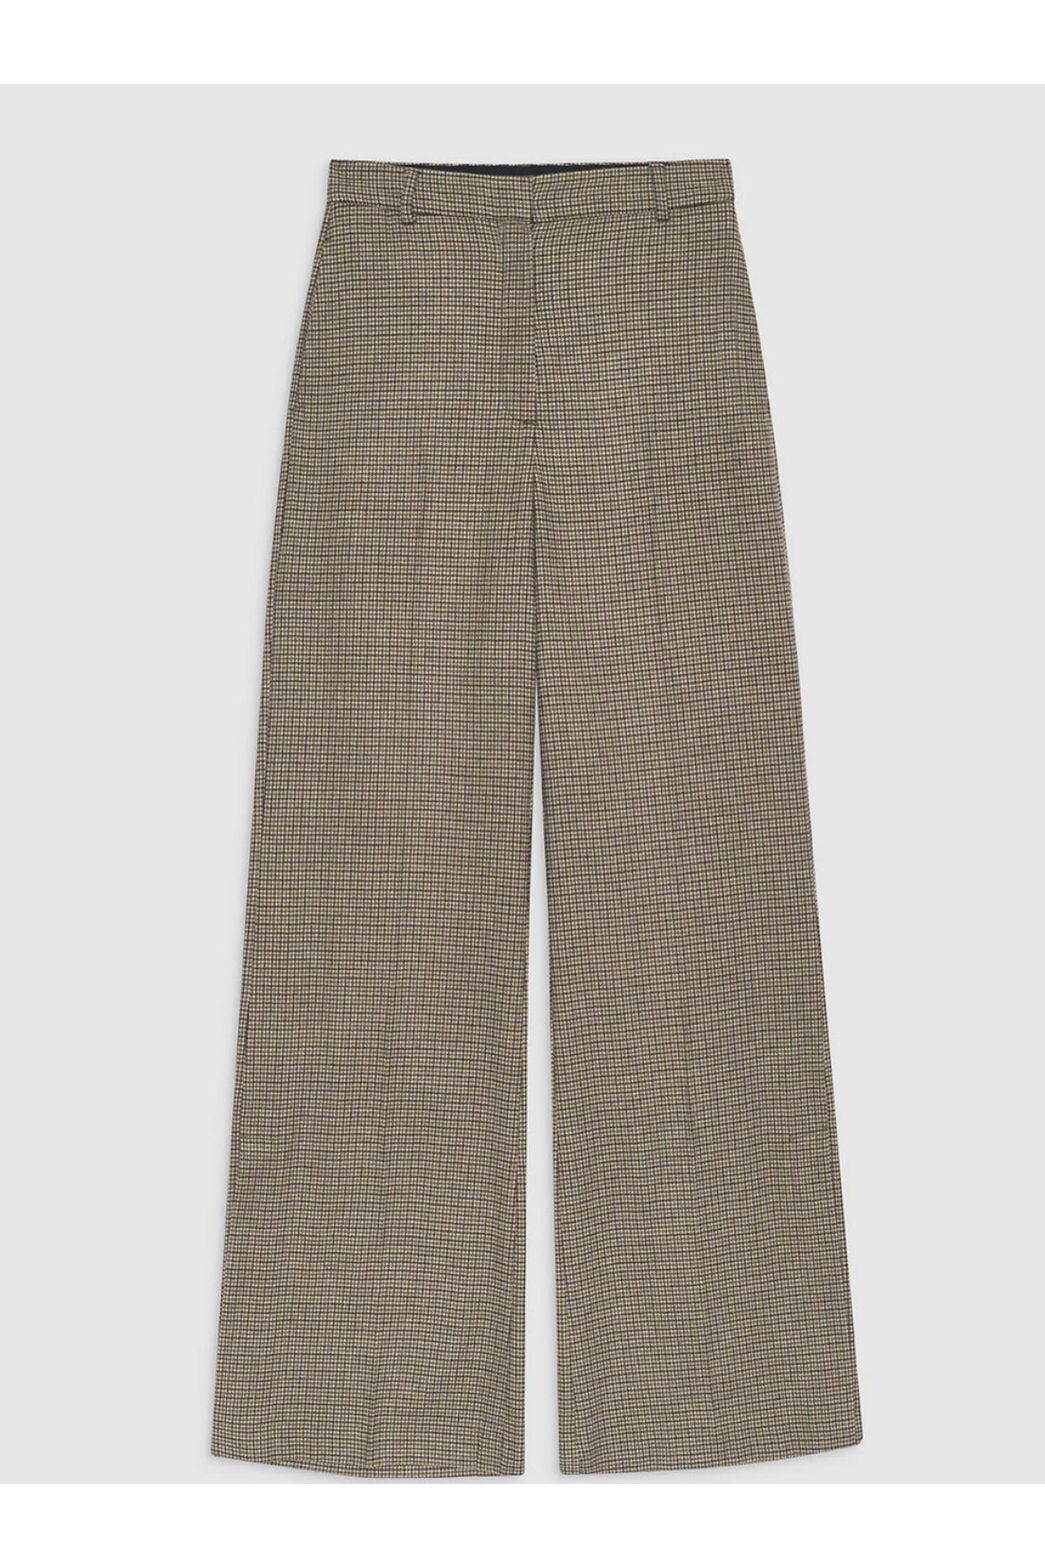 Lyra Trouser in Mini Houndstooth by Anine Bing